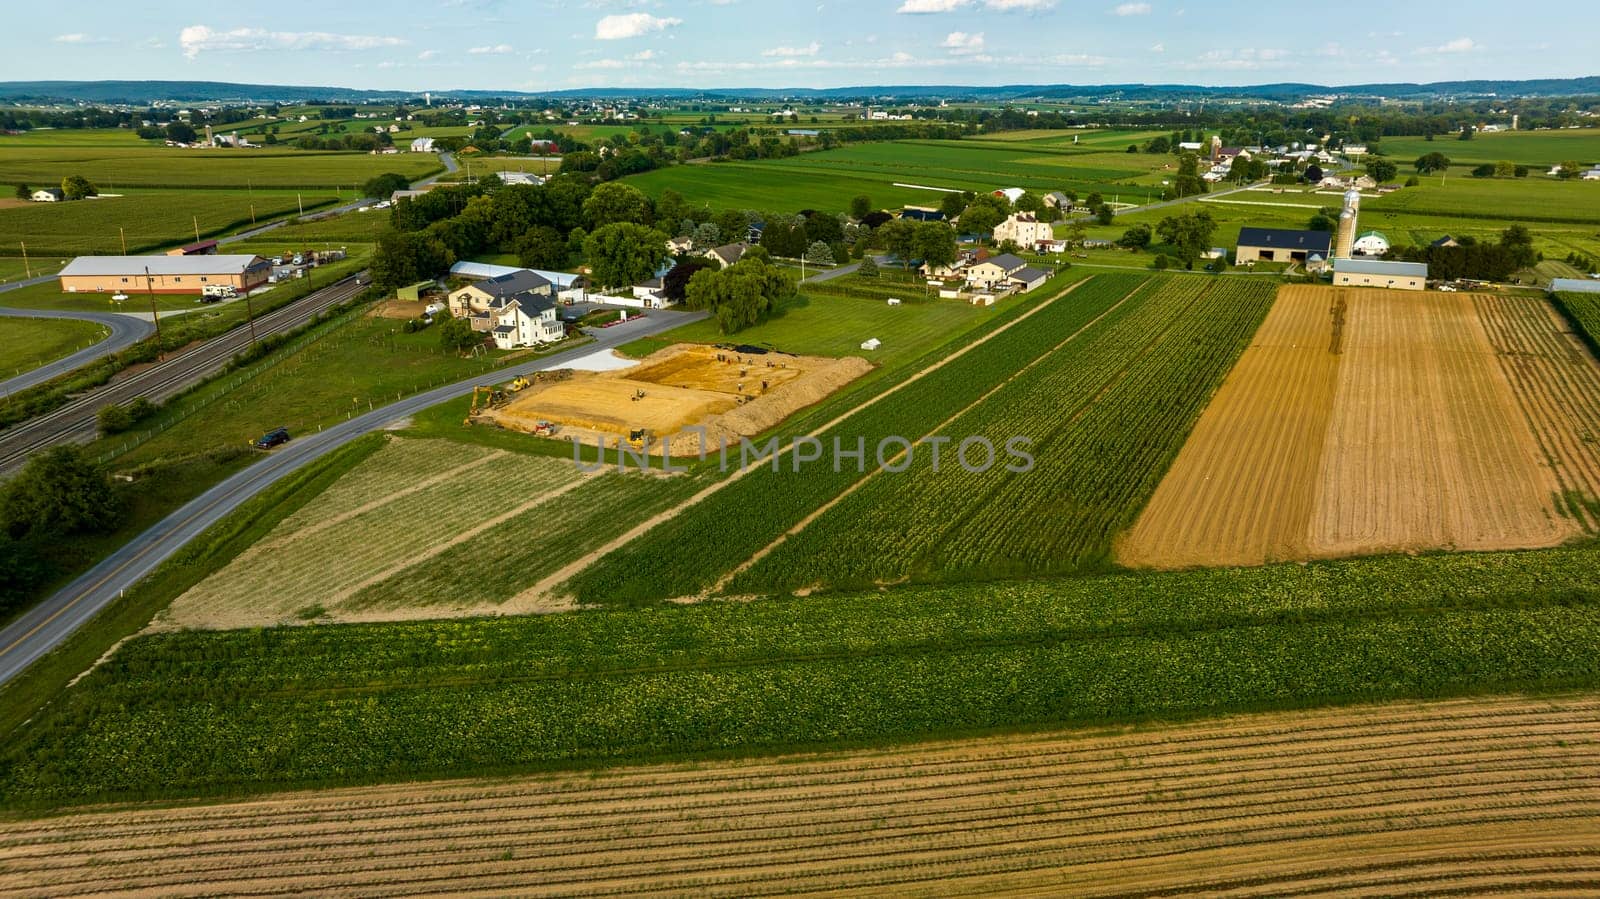 Aerial View Featuring Roads Intersecting Near Construction Site Amidst Farmland With Fields In Various Stages Of Cultivation And A Small Community In The Background.